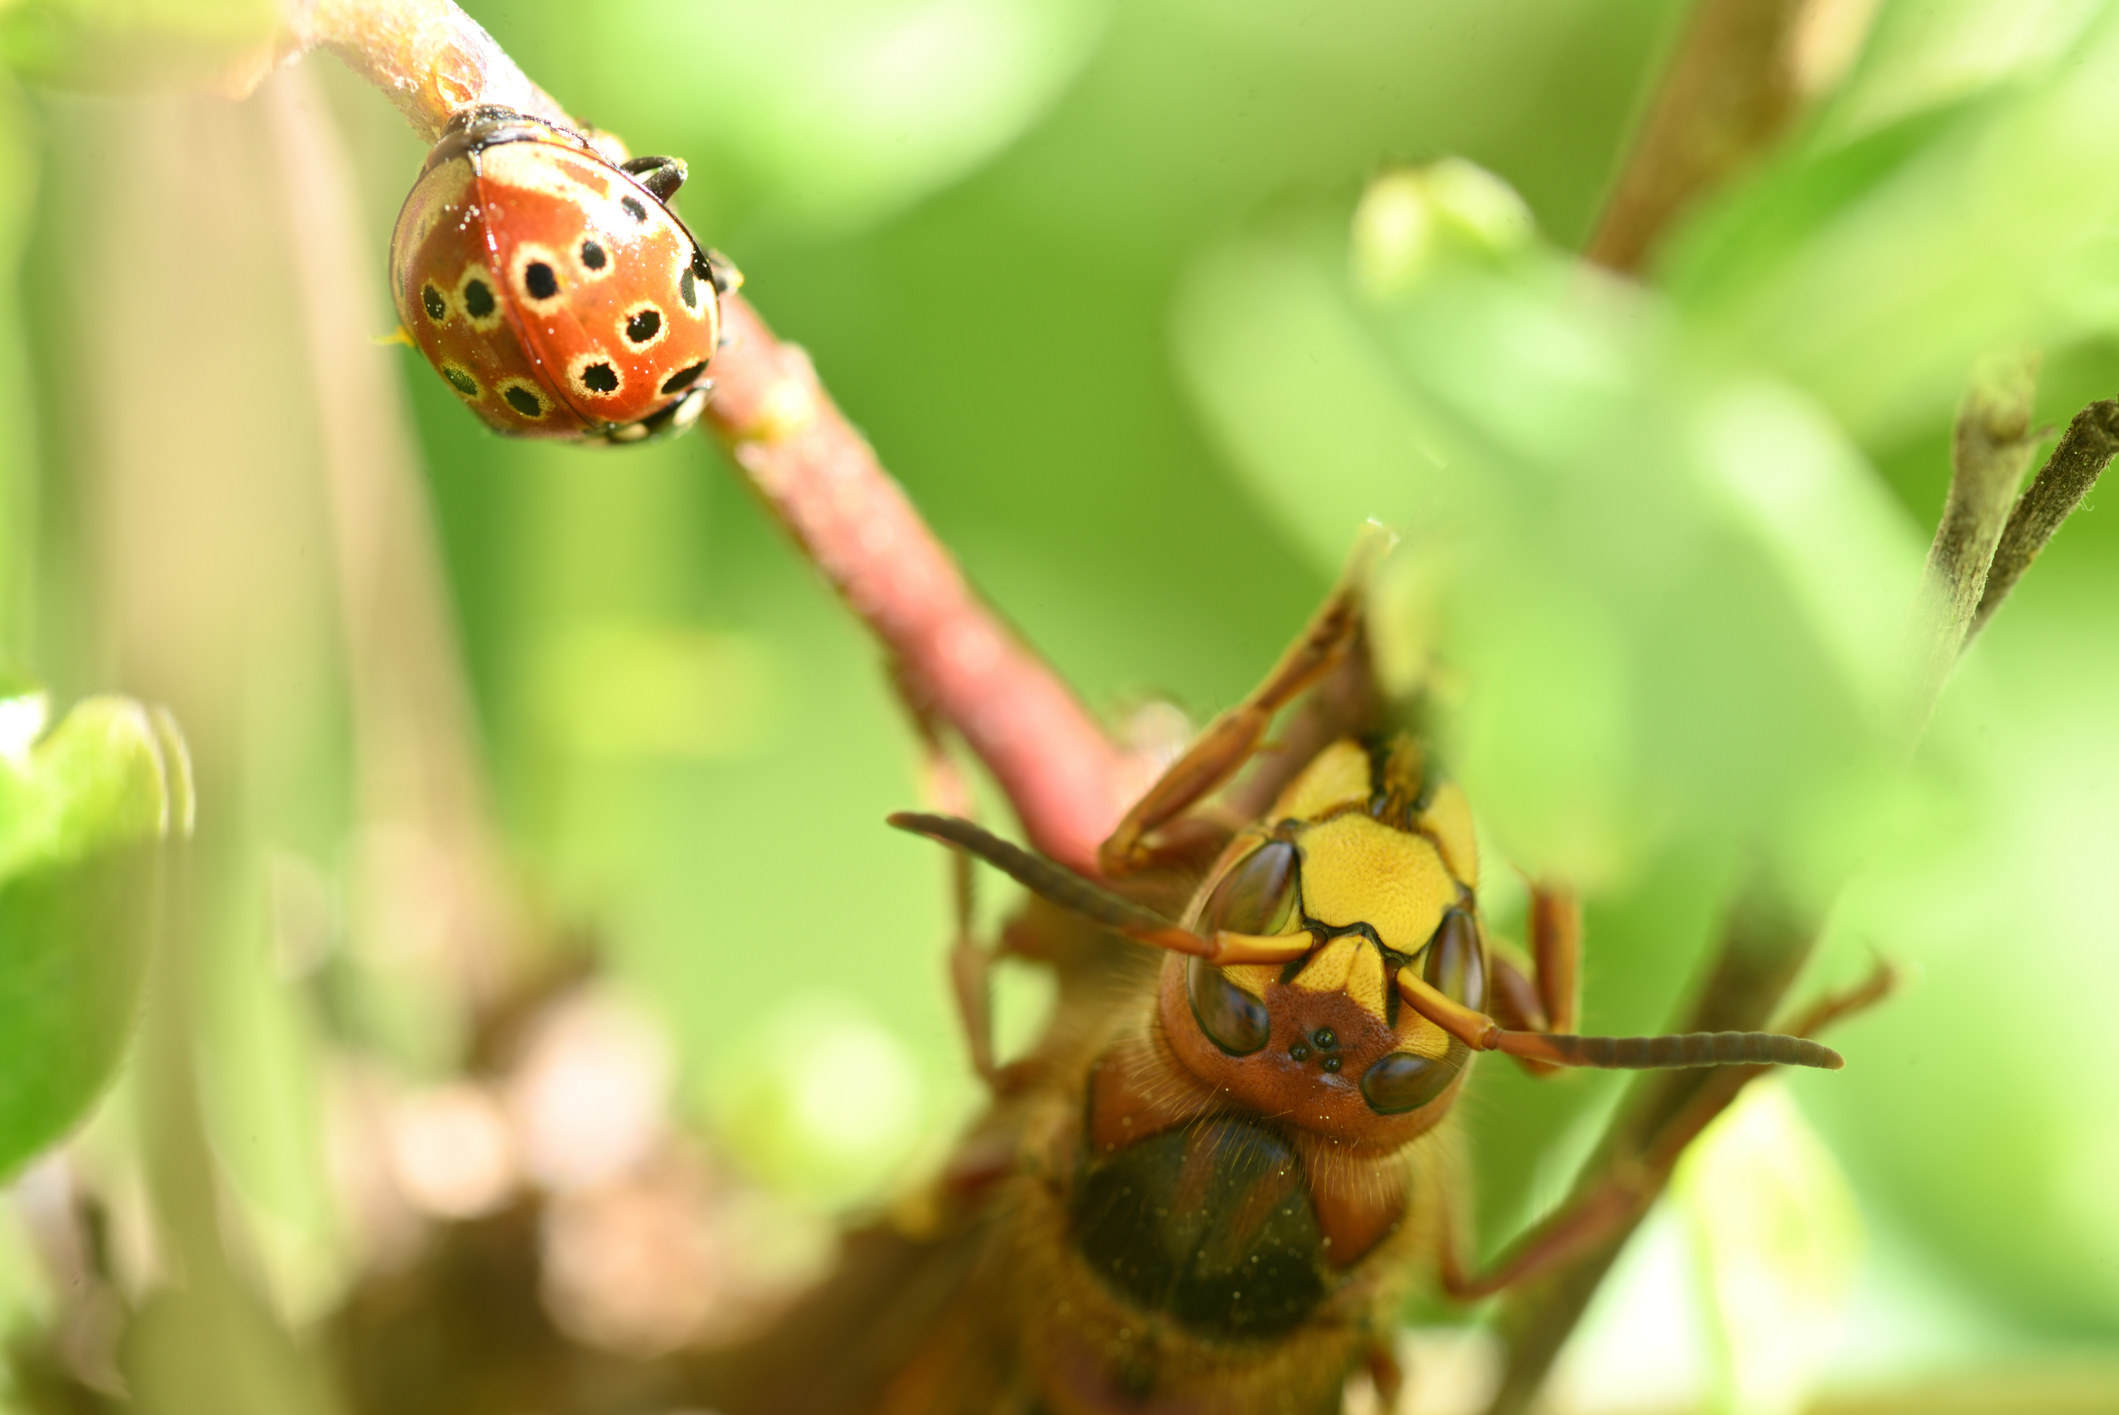 A wasp and a ladybug